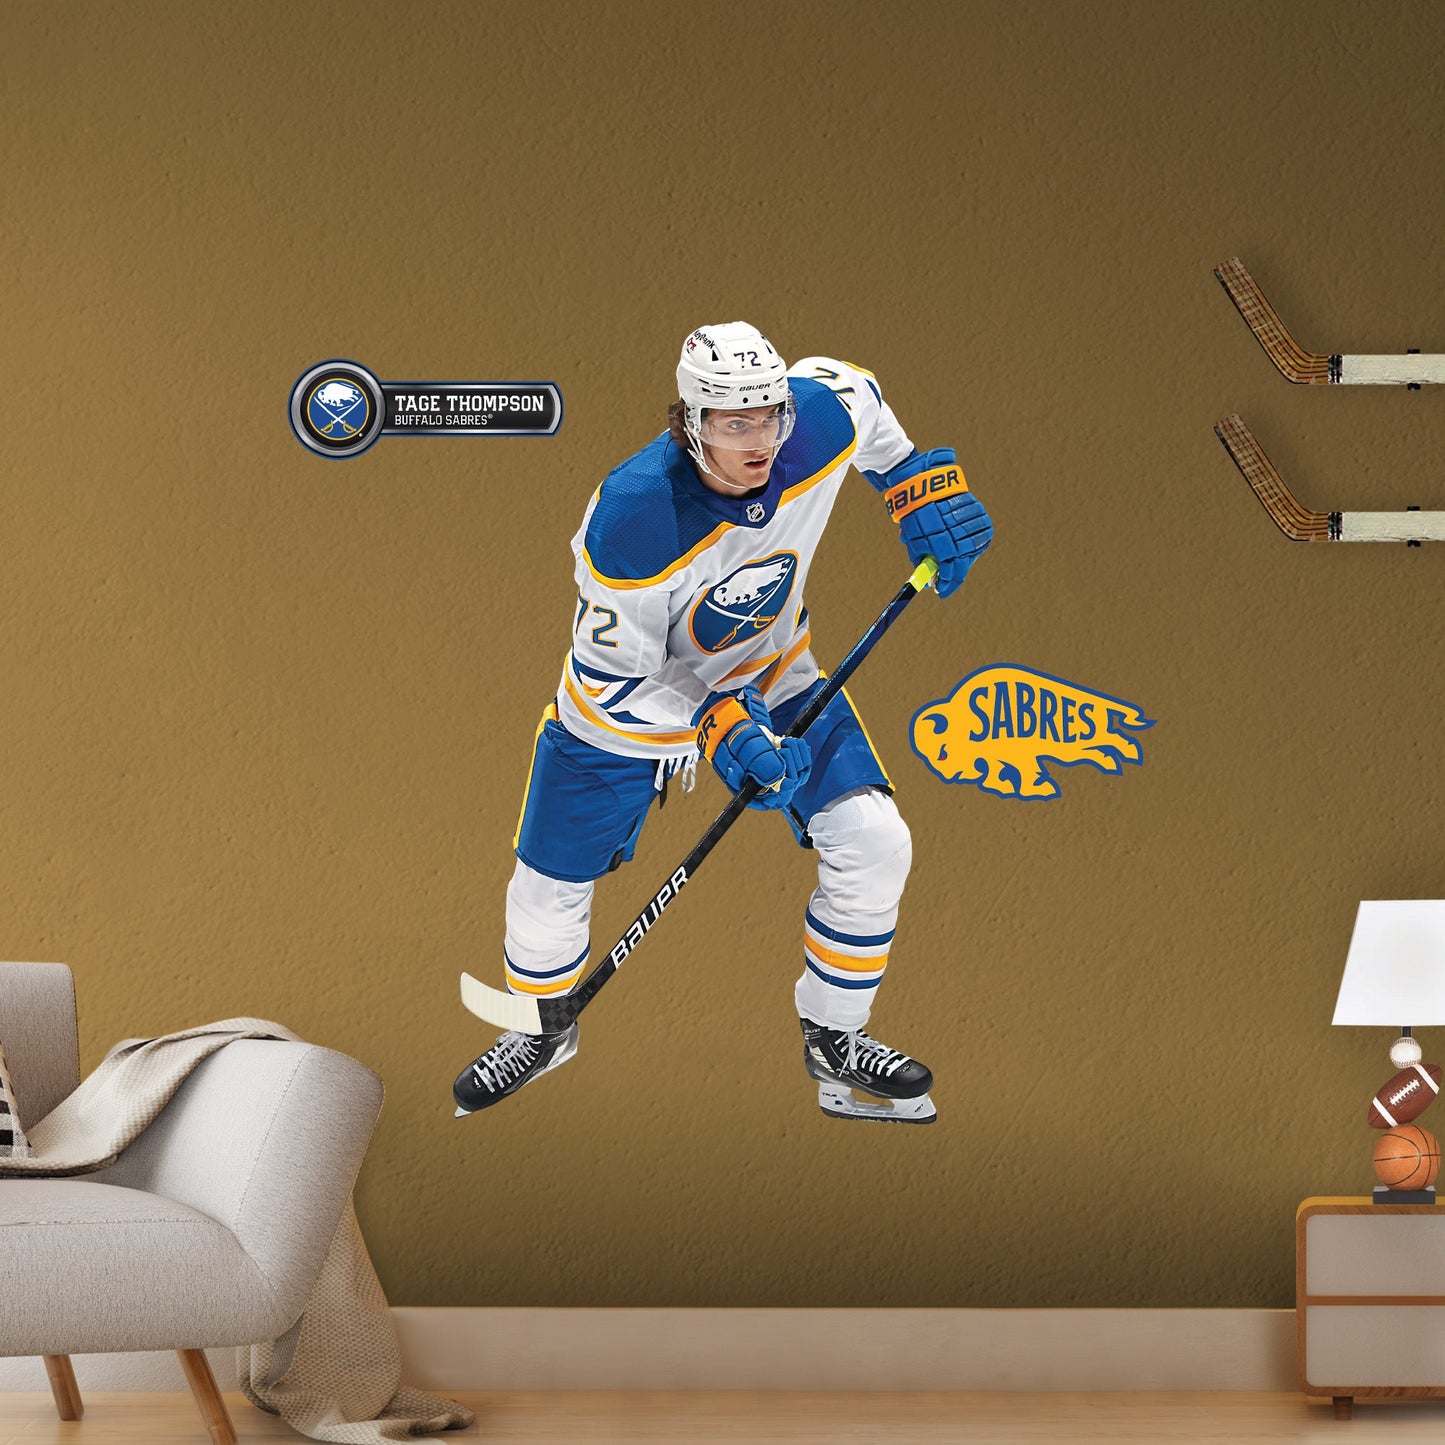 Buffalo Sabres: Tage Thompson - Officially Licensed NHL Removable Adhesive Decal